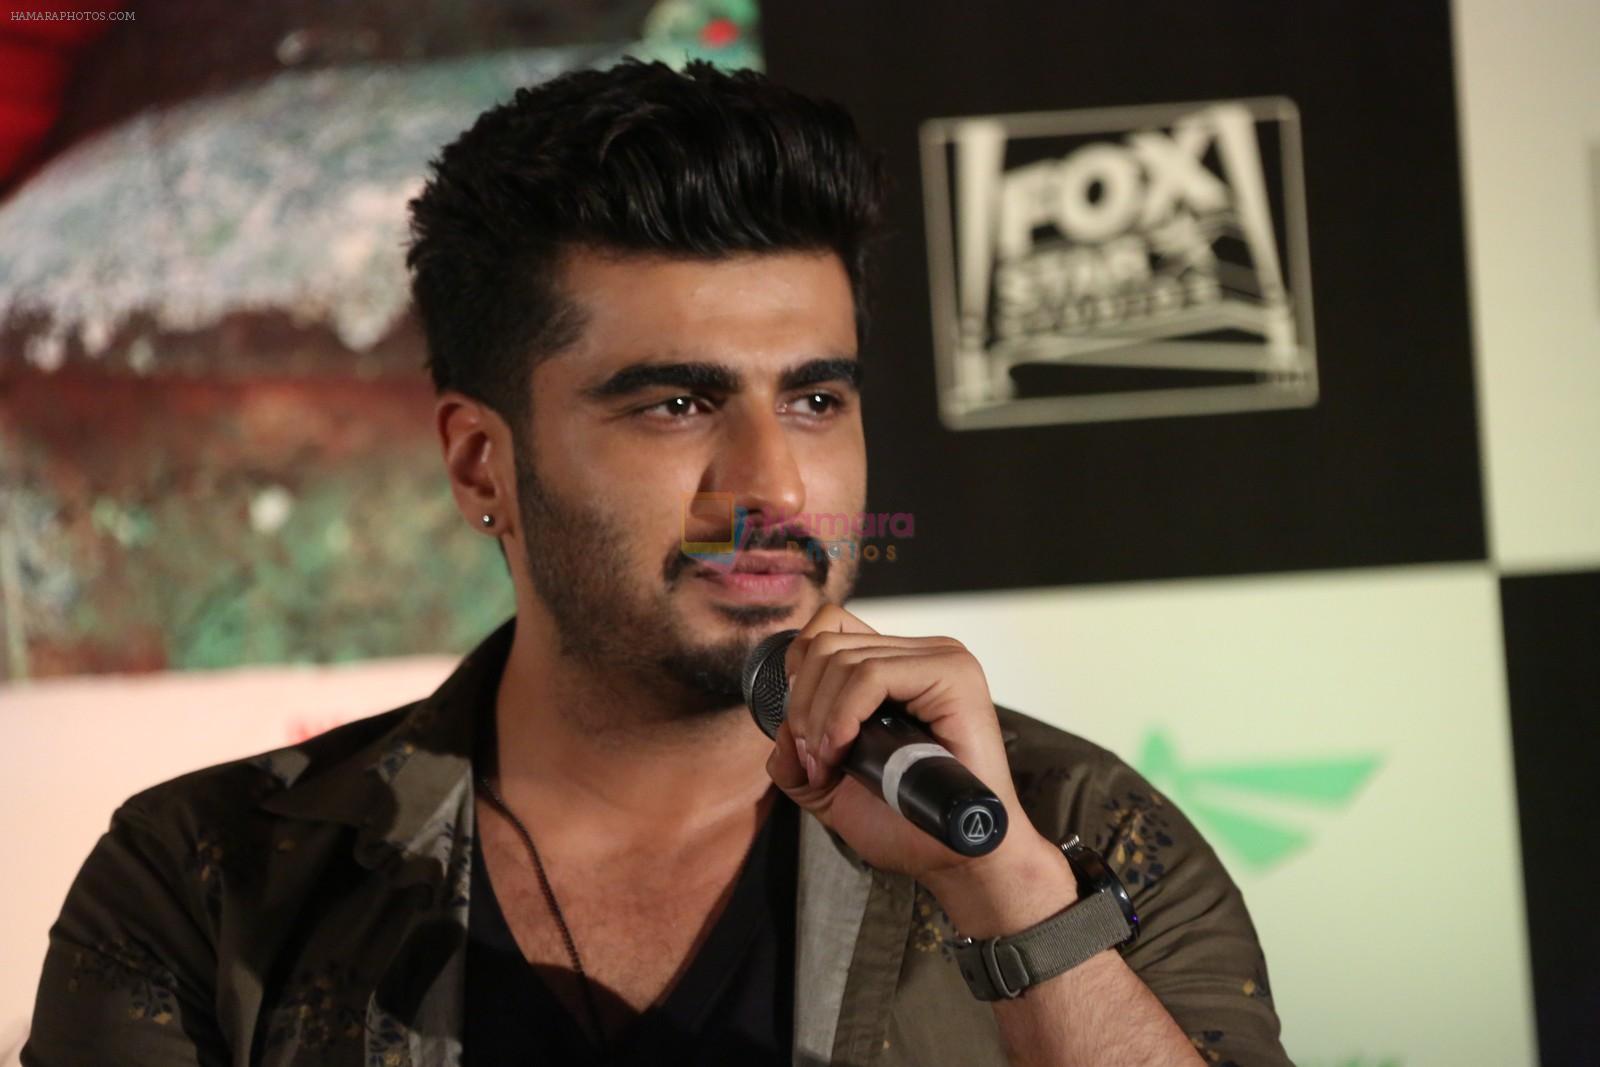 Arjun Kapoor at Finding Fanny Promotional Event in Hyderabad on 2nd Sept 2014